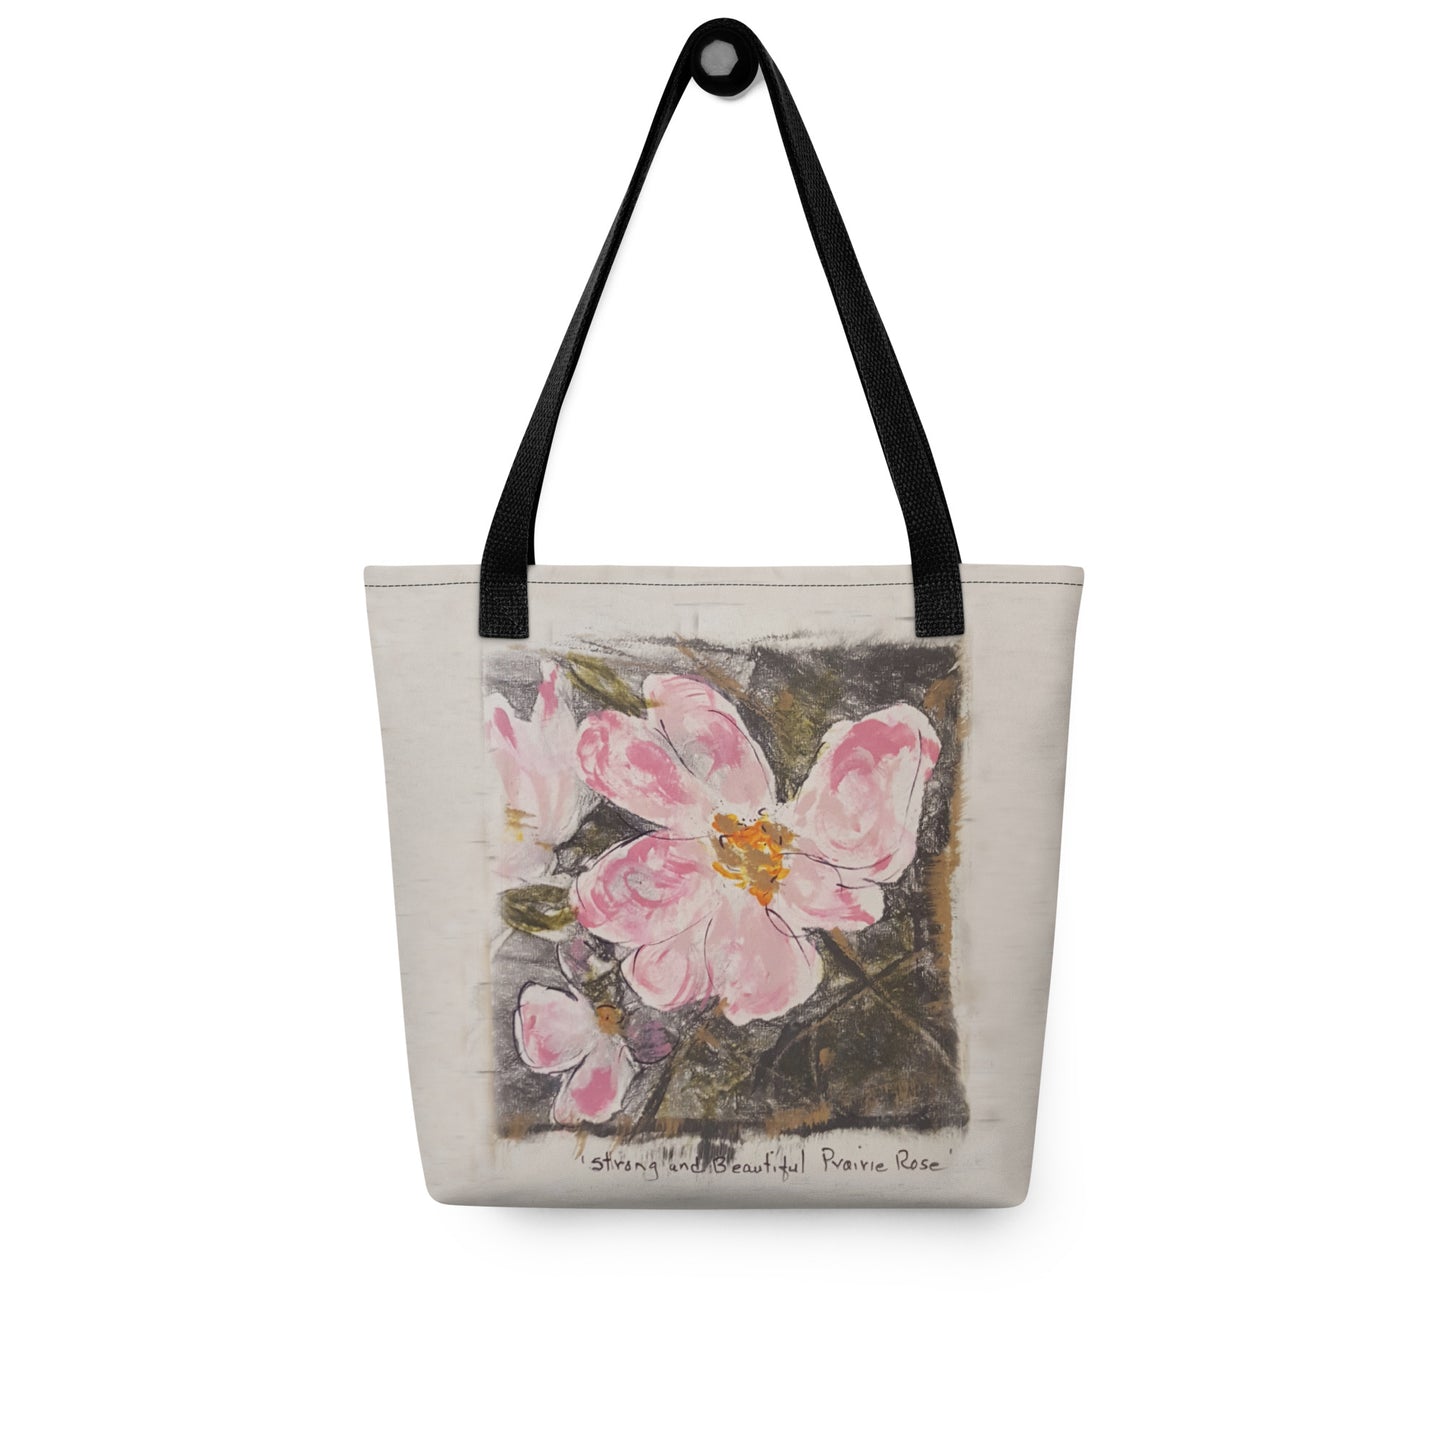 NEW! - Strong and Beautiful Prairie Rose - Artful Tote